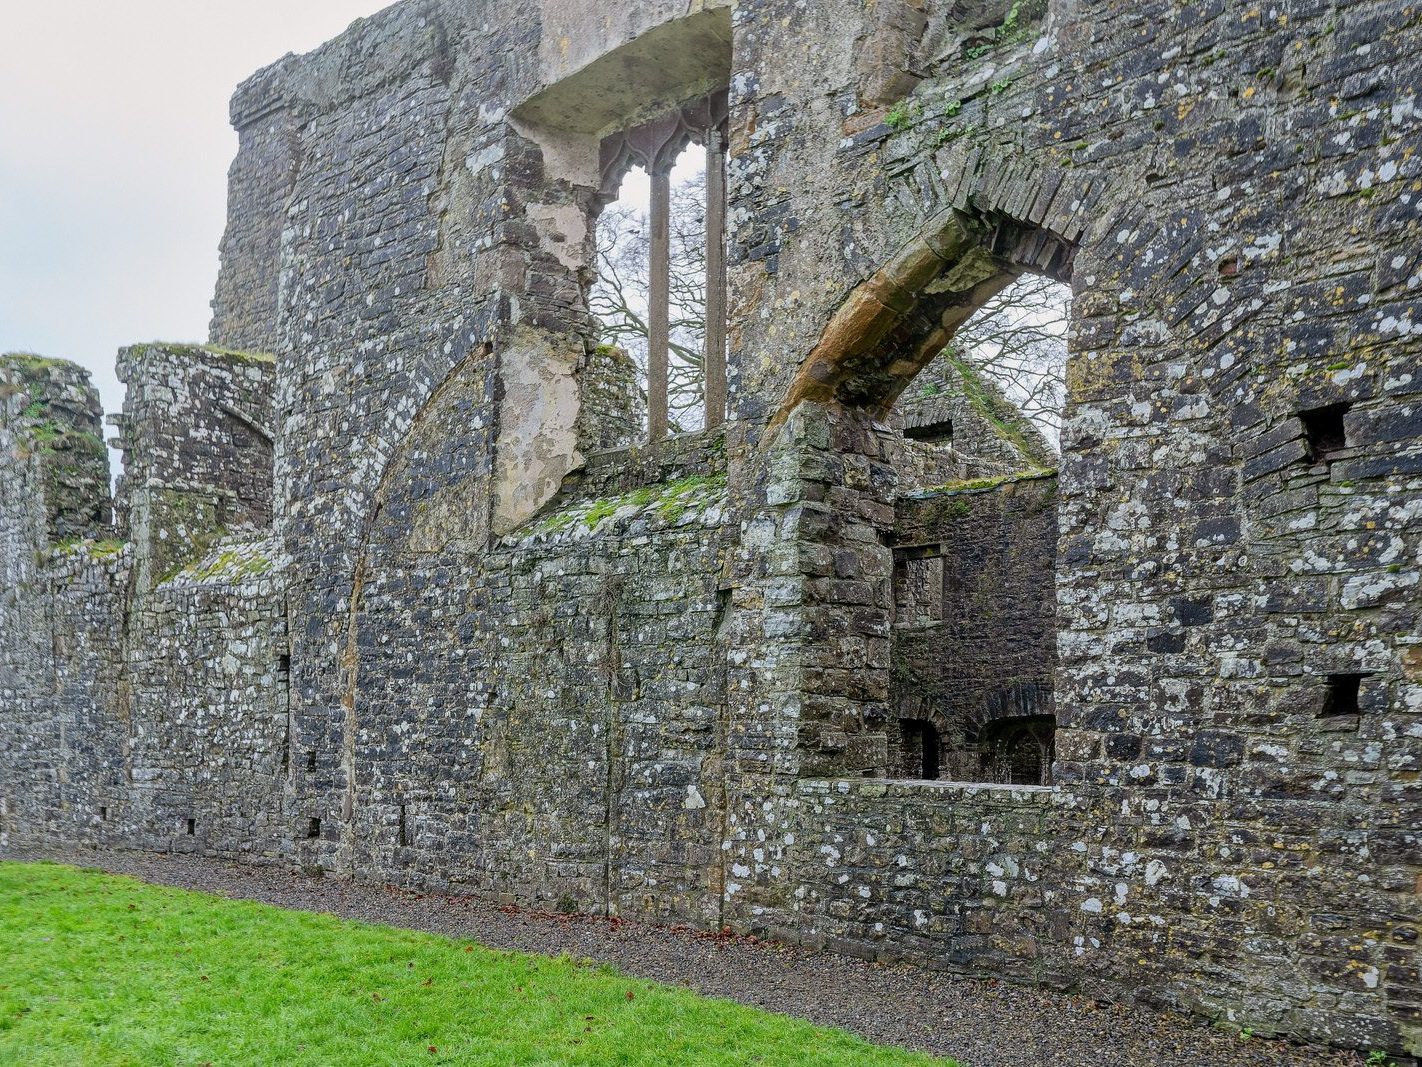 BECTIVE ABBEY WHICH I VISITED LAST CHRISTMAS [THERE WERE NO OTHER VISITORS AS IT WAS A VERY WET DAY]--225237-1